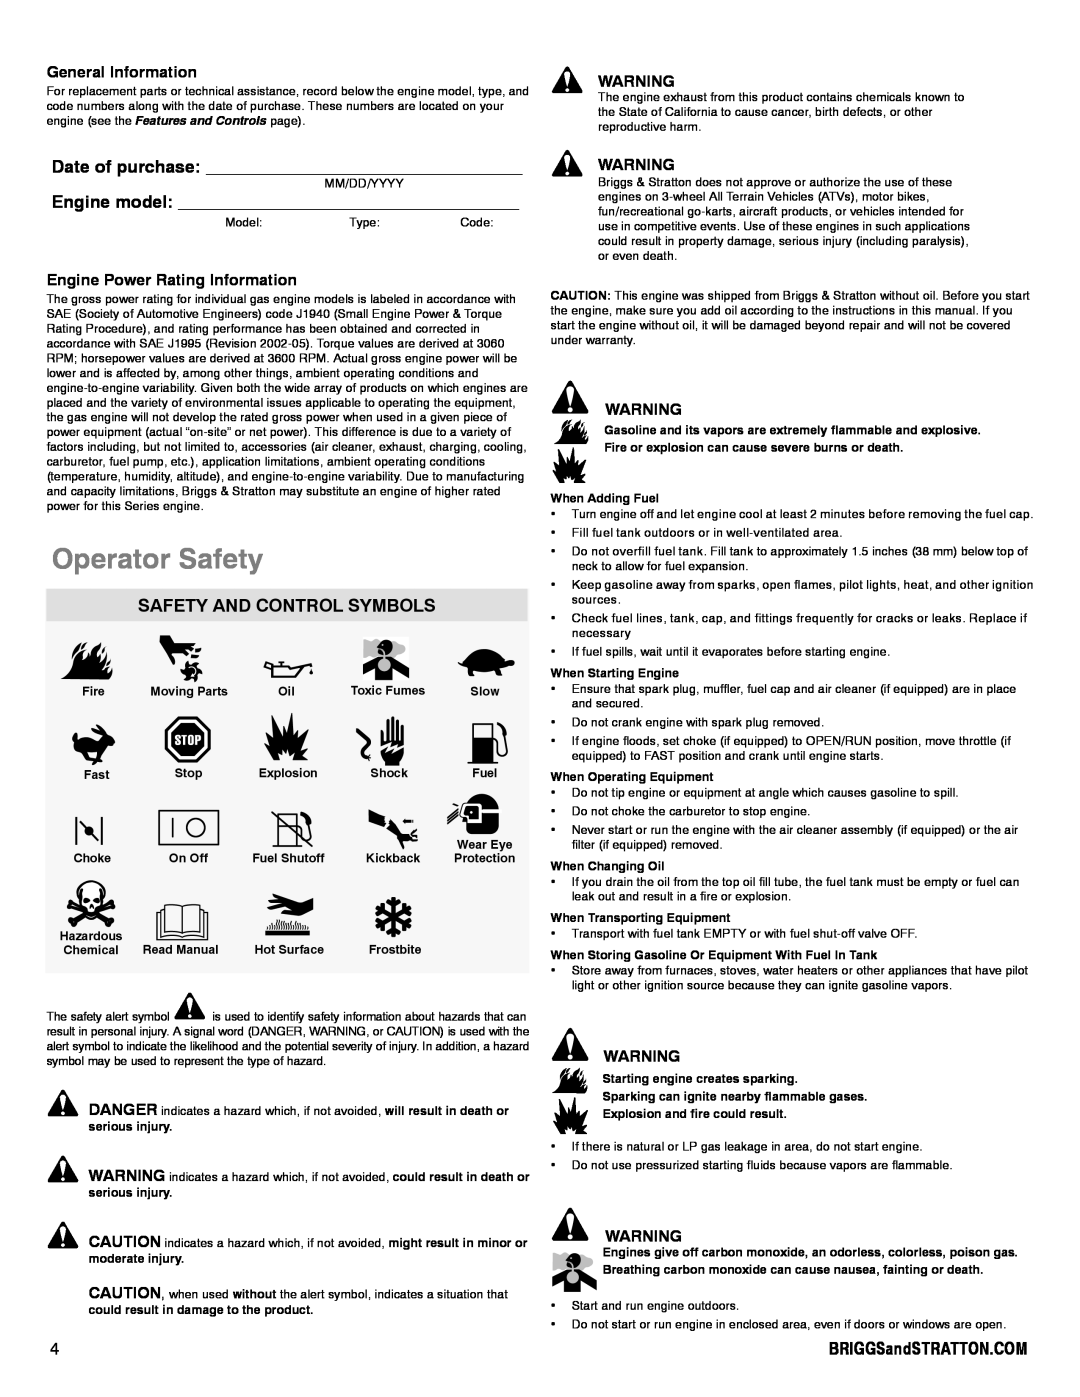 Snapper 90000 manual Operator Safety, Date of purchase, Engine model, Safety And Control Symbols, General Information 